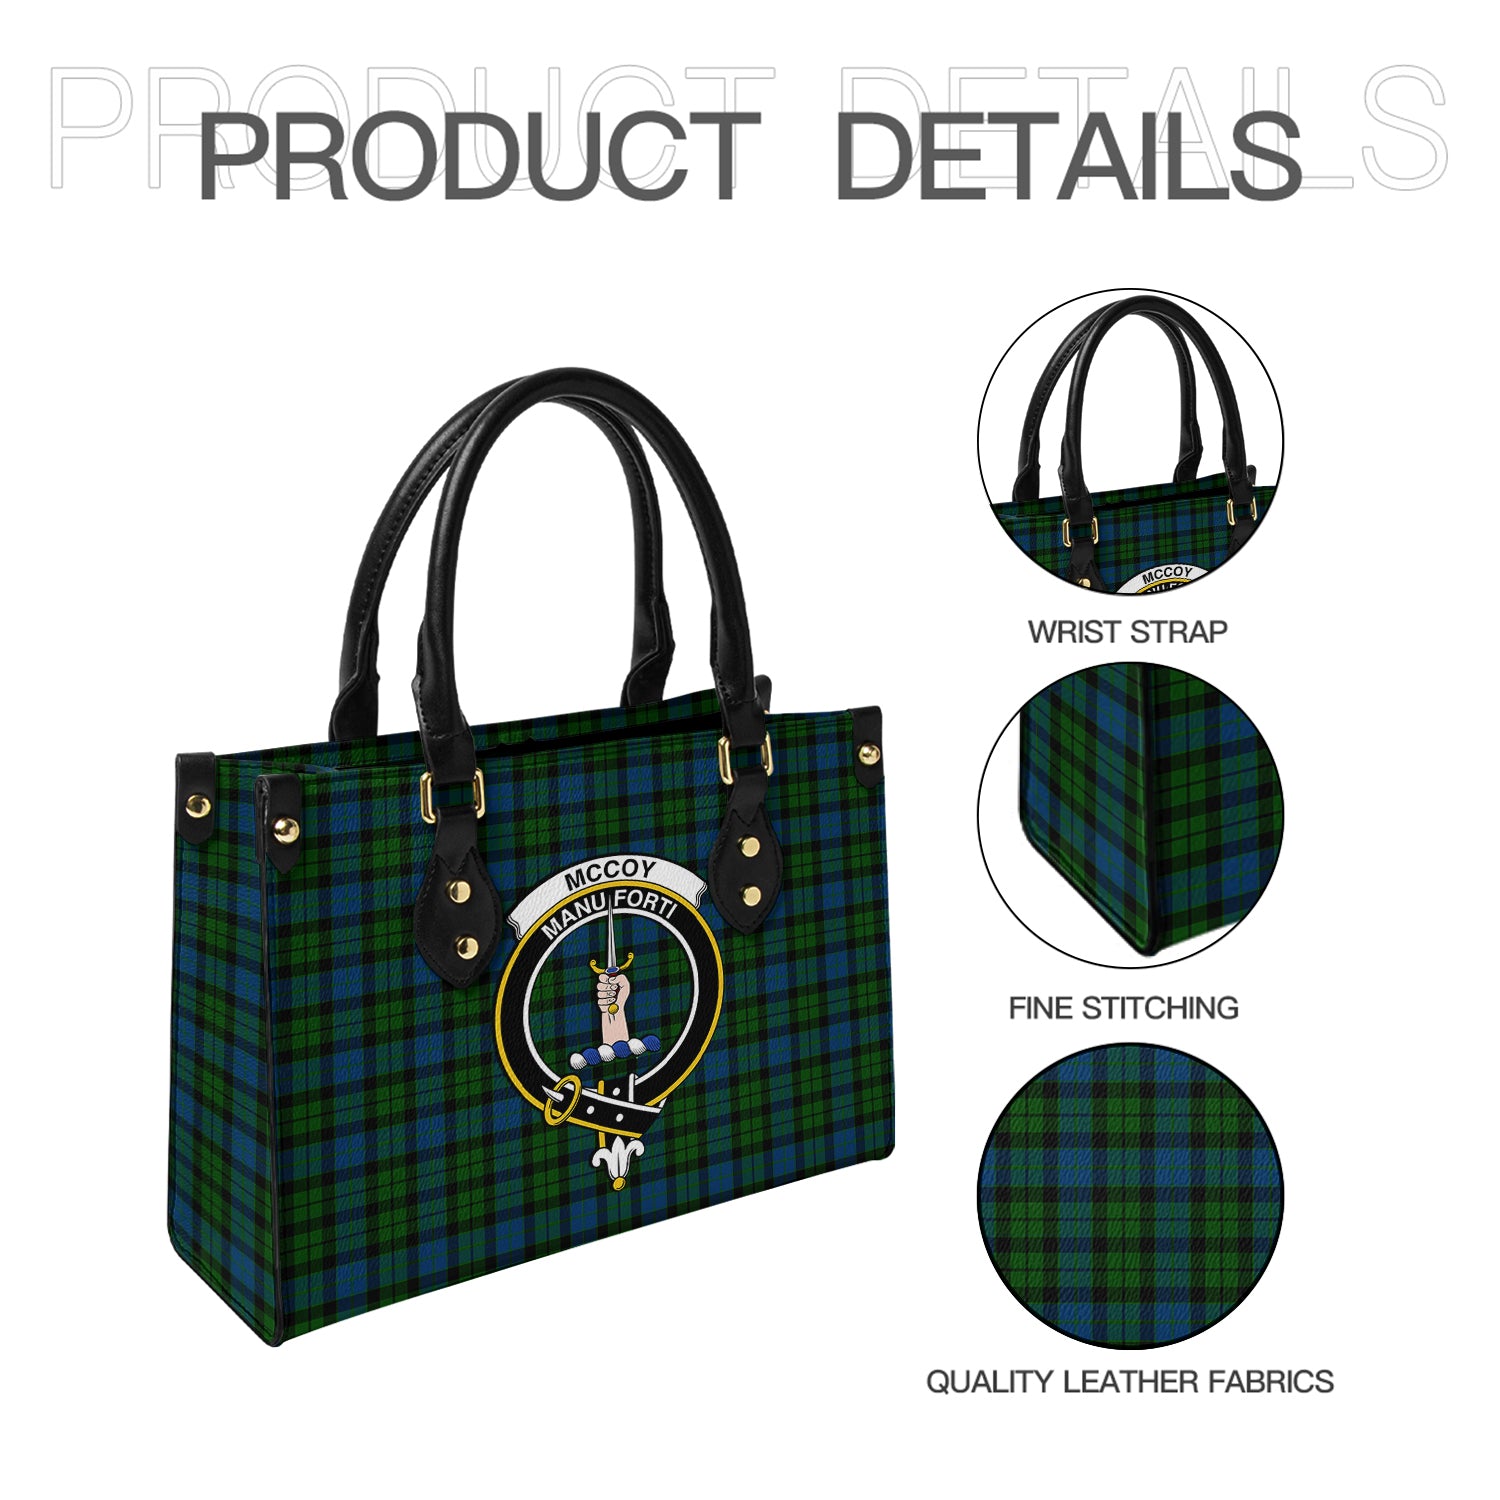 mccoy-tartan-leather-bag-with-family-crest